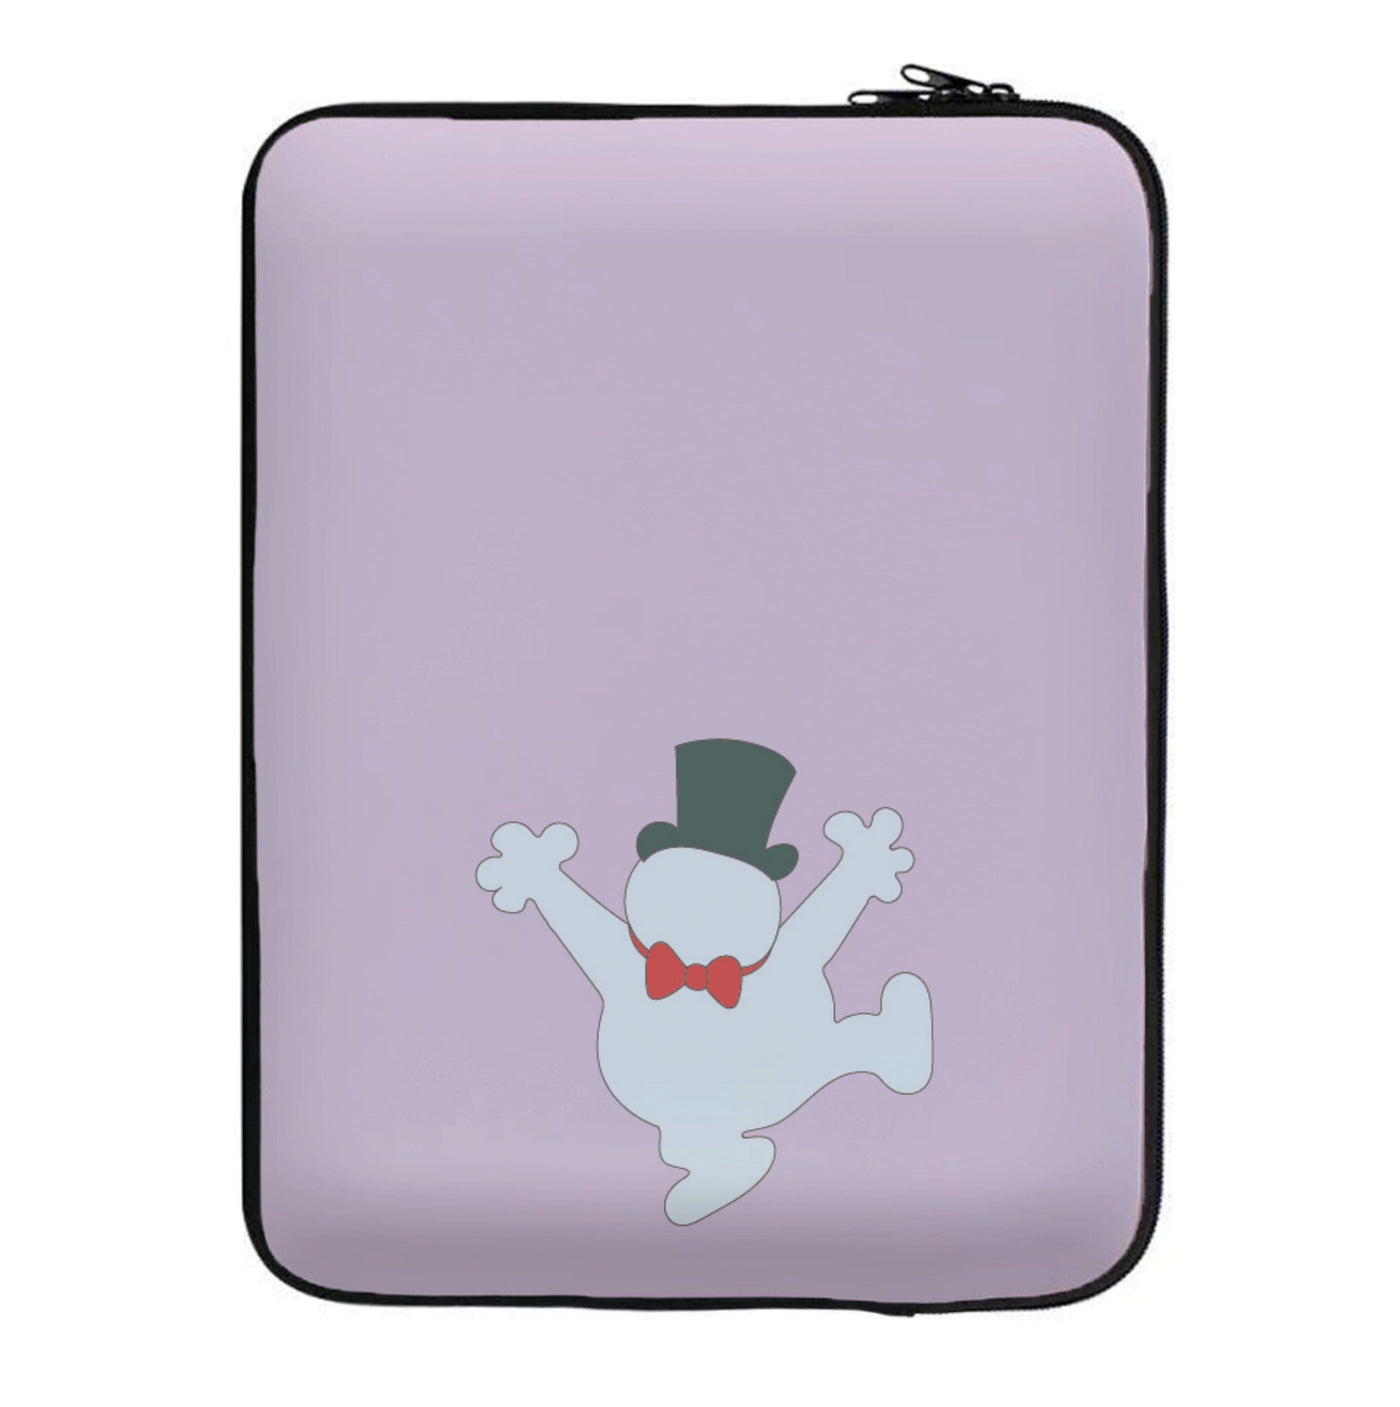 Outline - Frosty The Snowman Laptop Sleeve